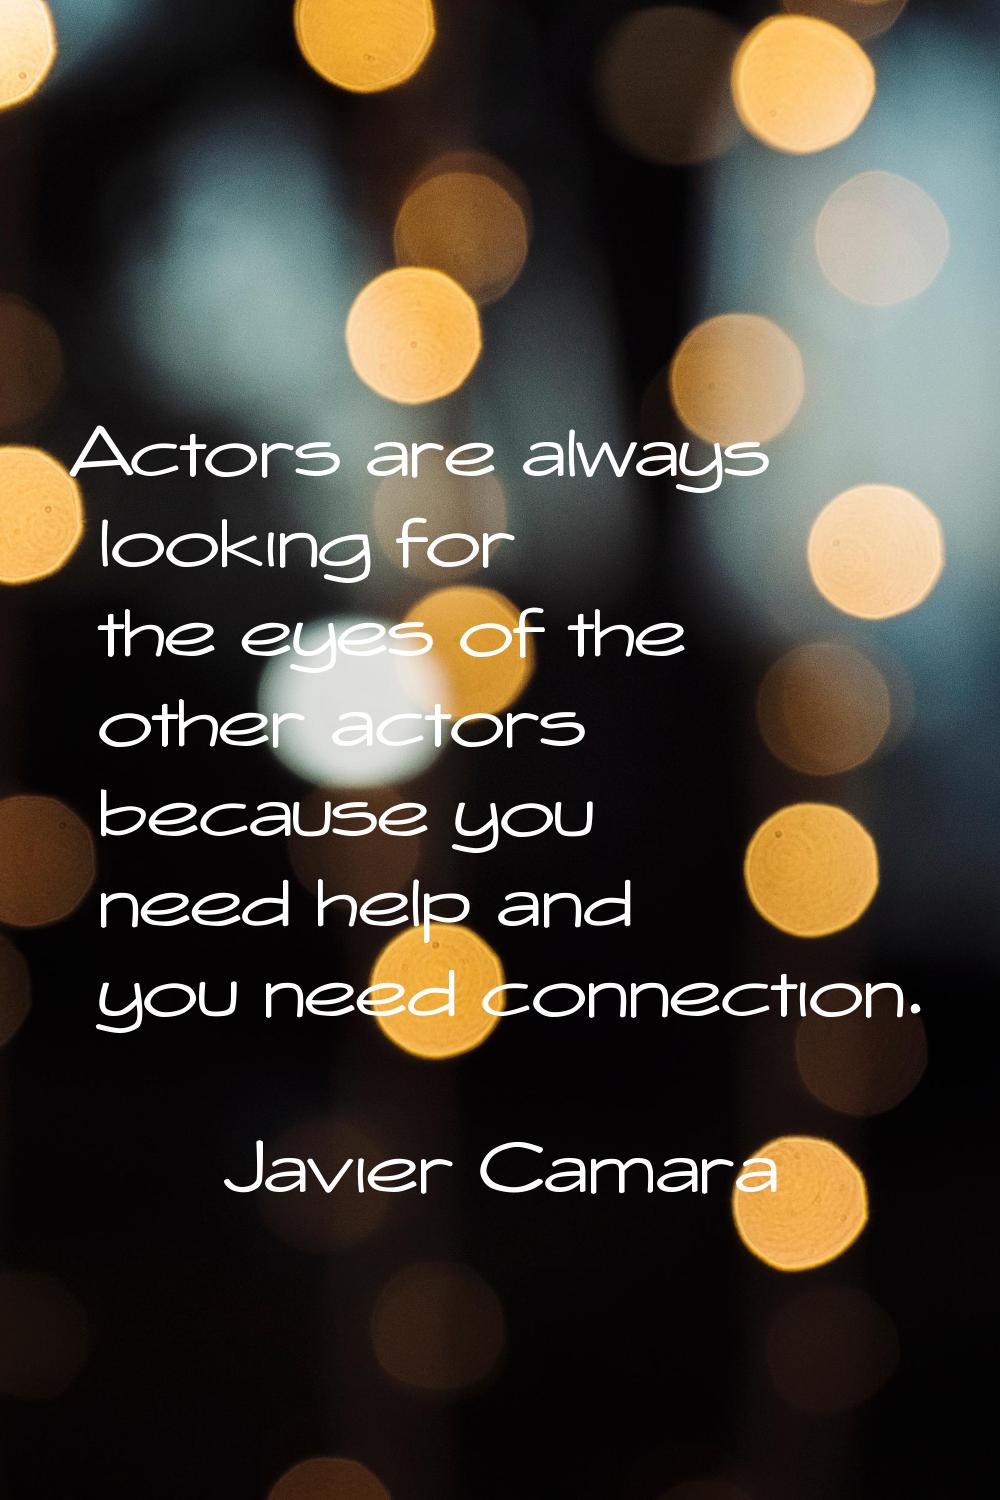 Actors are always looking for the eyes of the other actors because you need help and you need conne